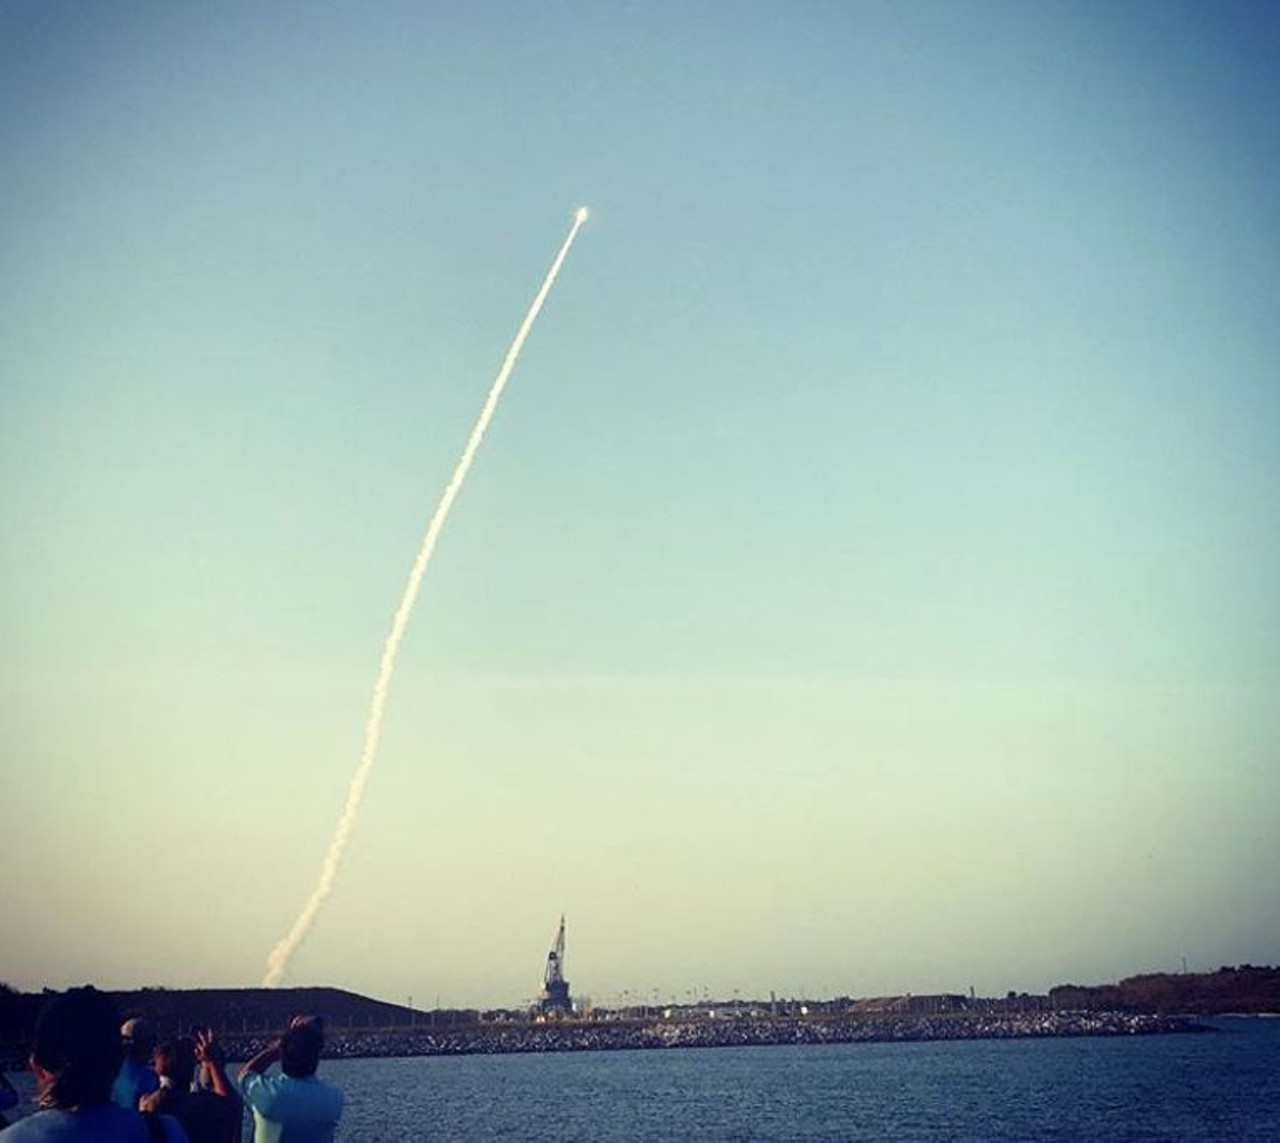 Port Canaveral
Port CanaveralPort Canaveral  
Fee: yes
Just about anywhere in the port can make for a good viewing area of the rocket launch. Just head toward the cruise ships and you can find a spot around there.
Photo via kassgrant /Instagram